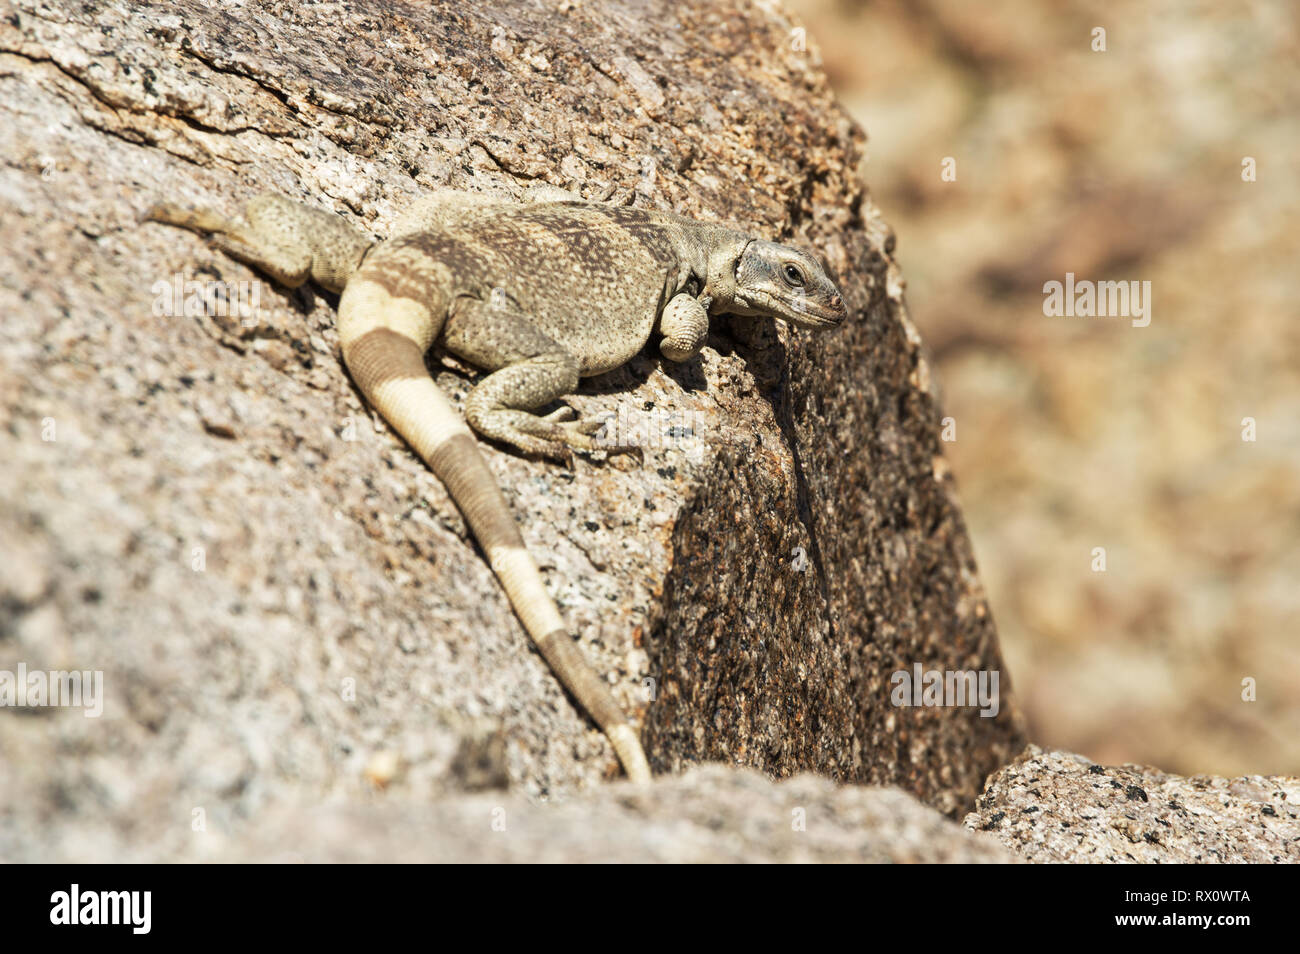 chuckwalla lizard or Souromalus ater sitting on a rock in the desert Stock Photo